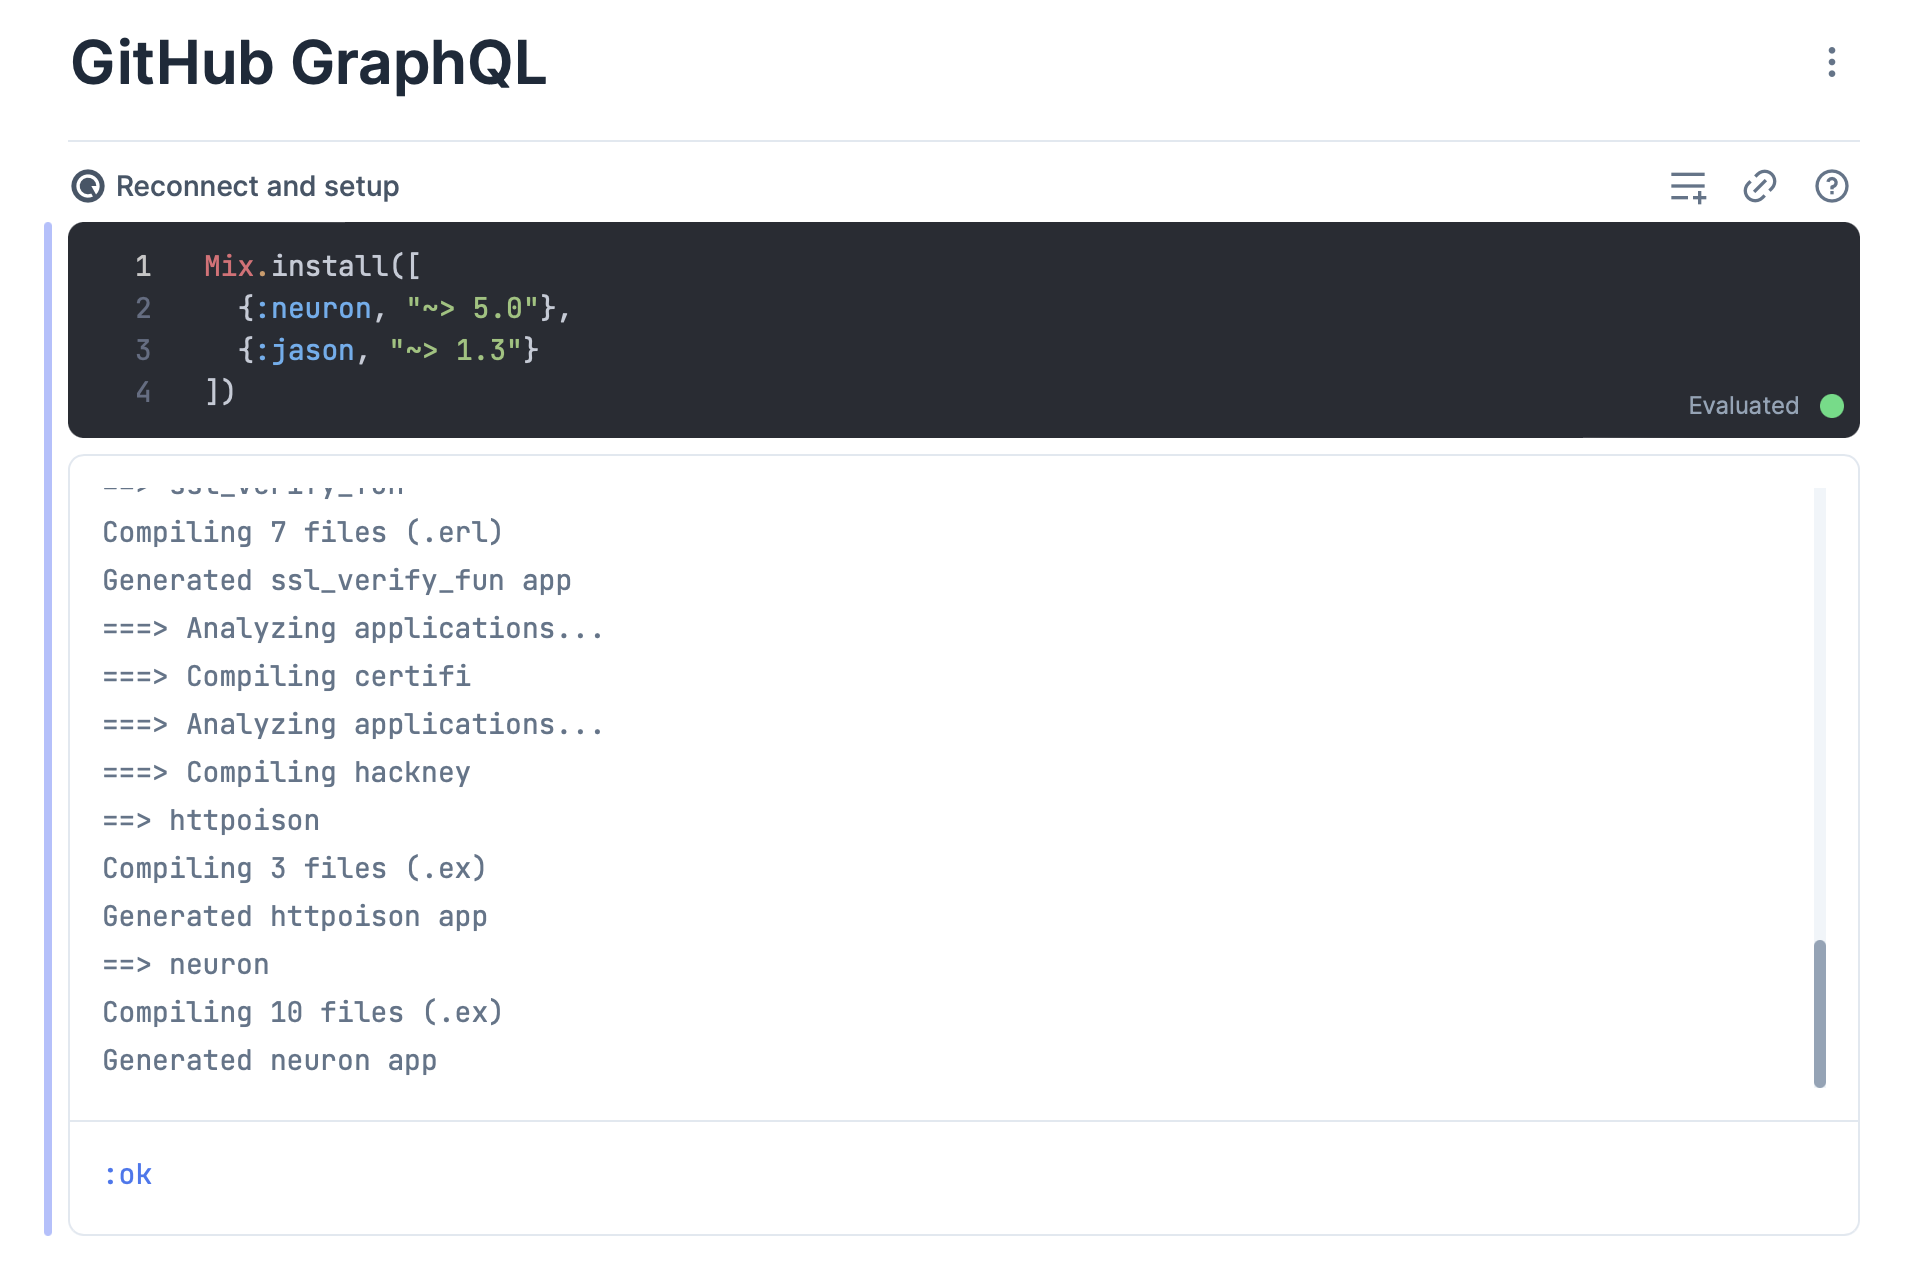 Adding dependencies for GraphQL to our Livebook